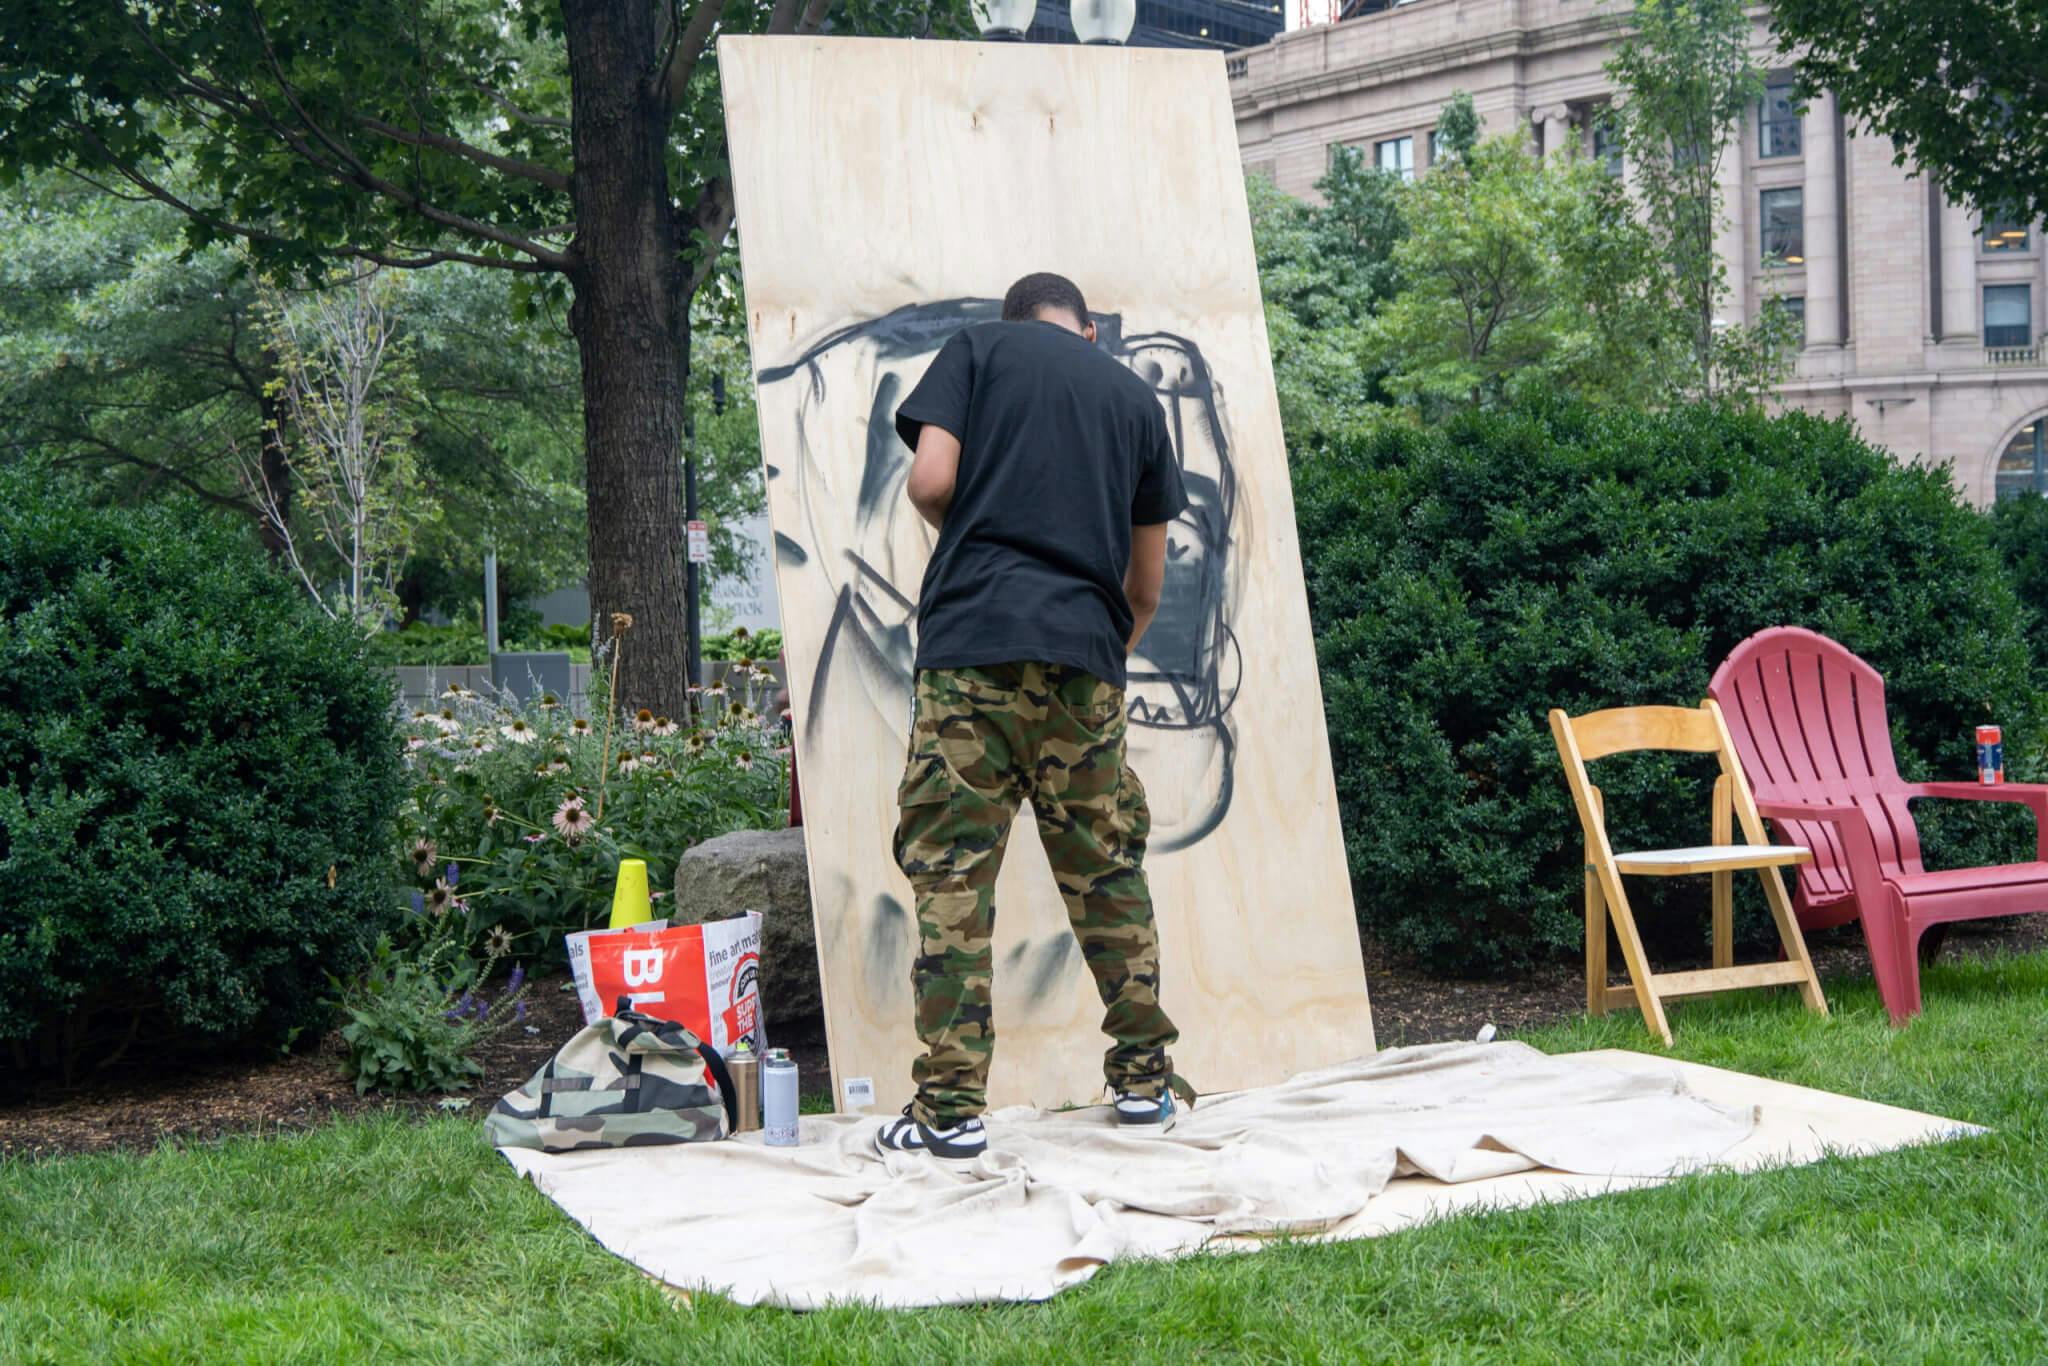 Image of Curtis Williams making live artwork at the “Sound in the City" event